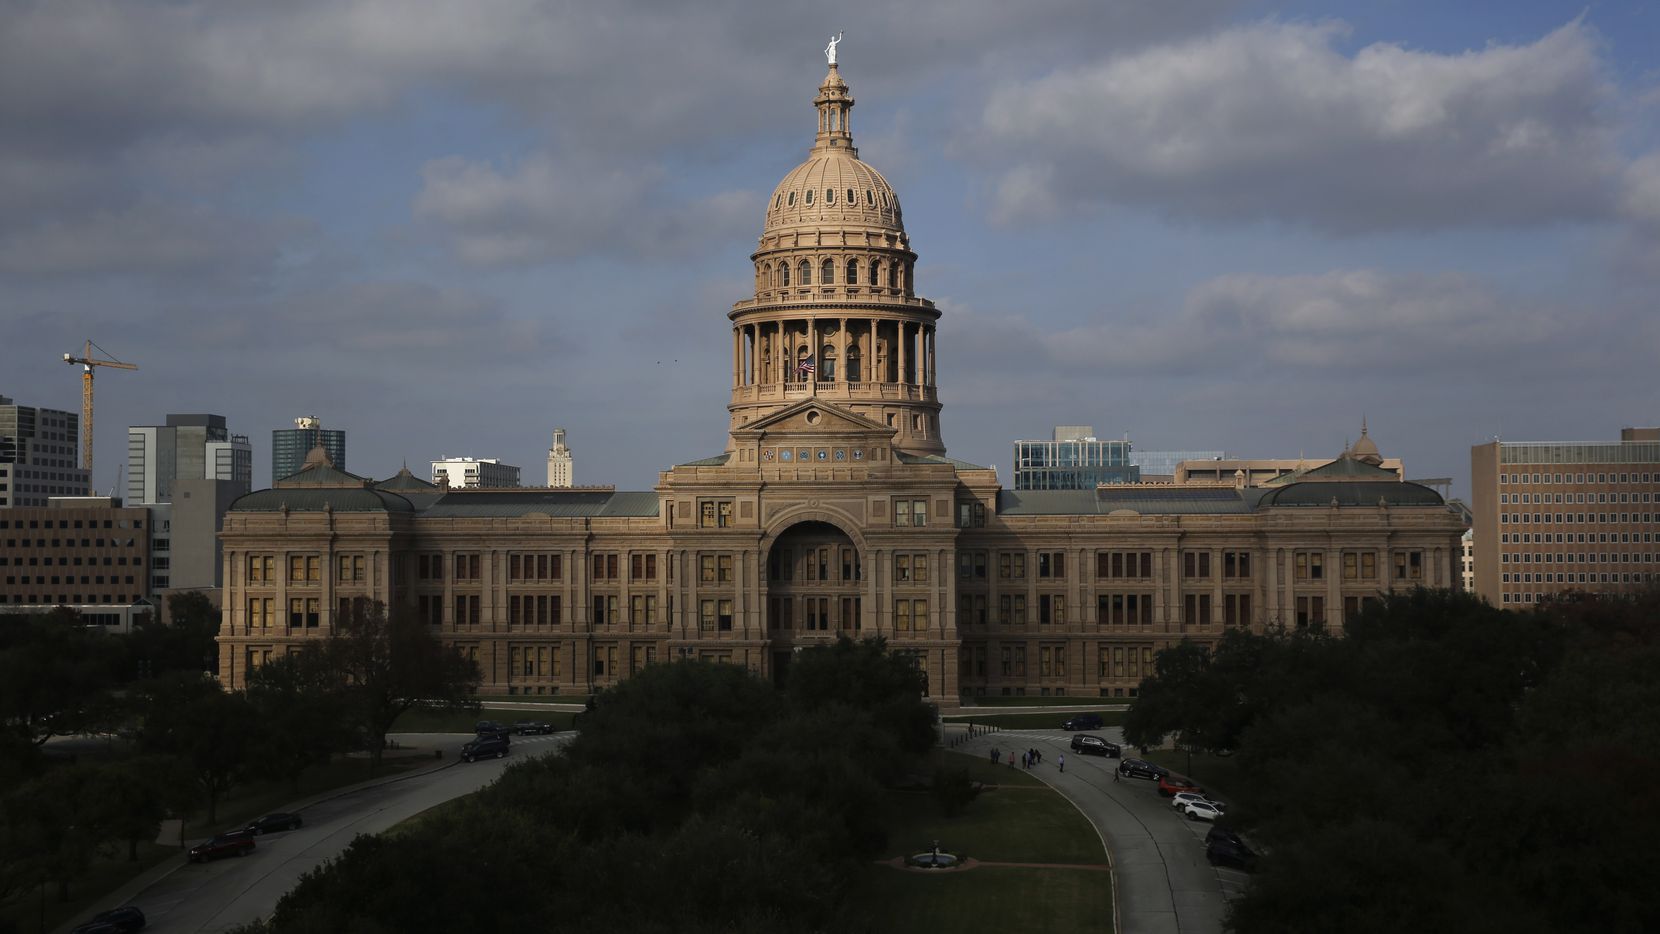 While saying nothing to the general public, Gov. Greg Abbott reacted to Monday’s leak of a...